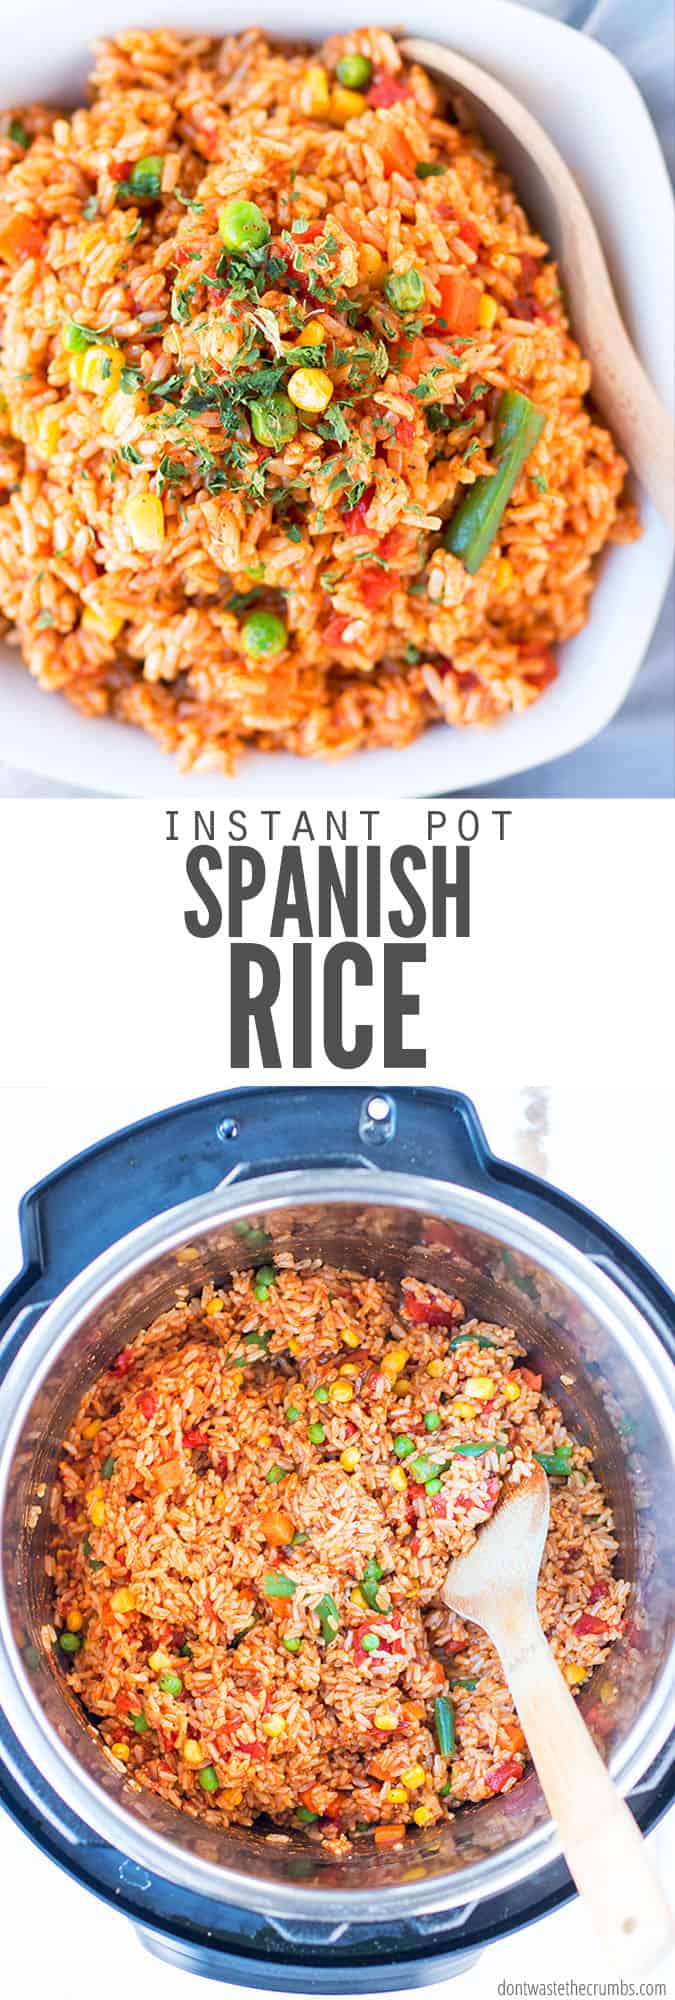 Instant Pot Spanish Rice | Don't Waste the Crumbs